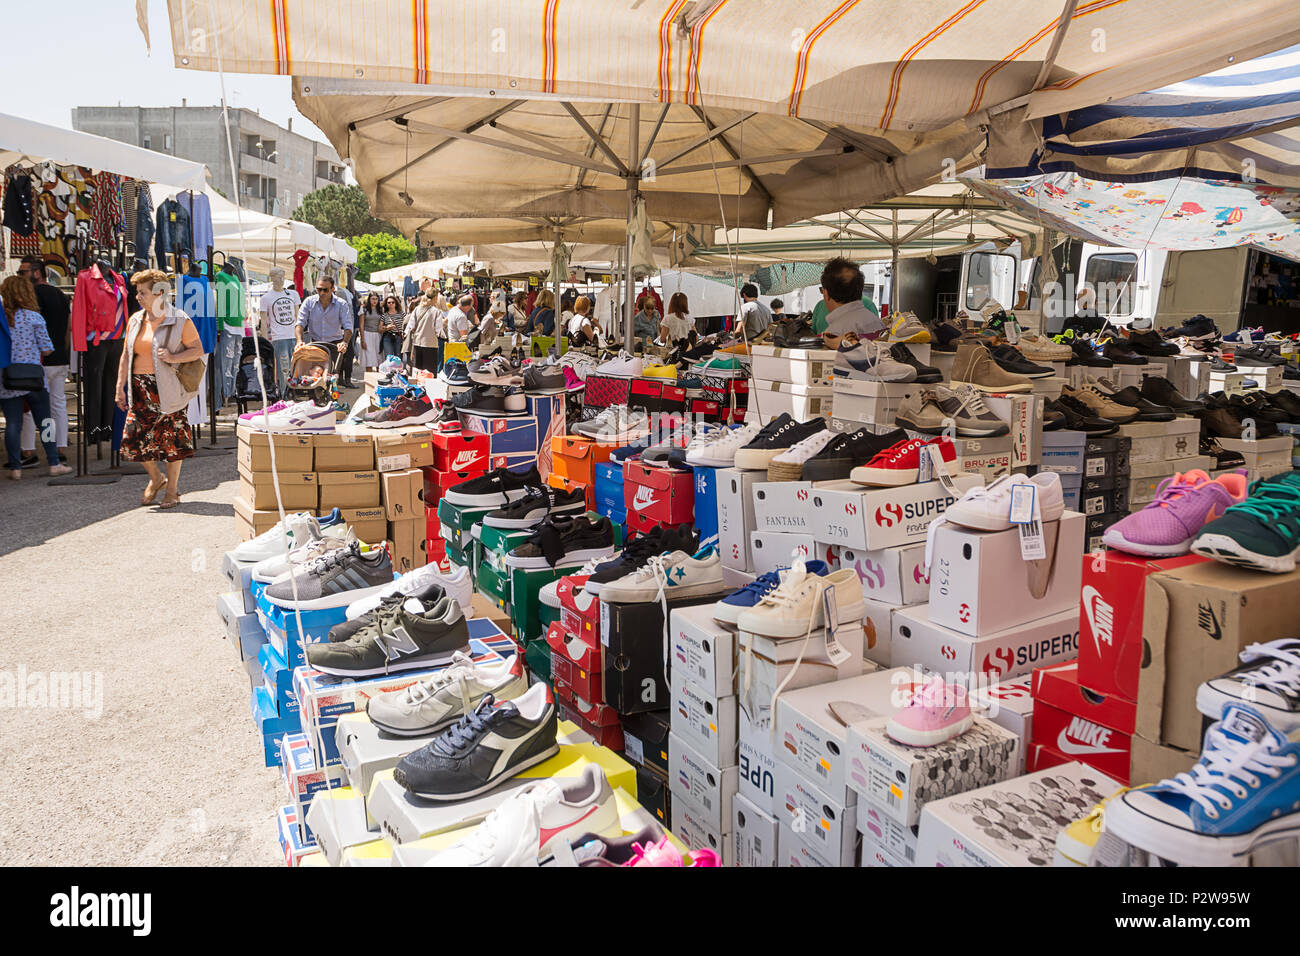 Ostuni, Italy - 28 april 2018: Stalls with shoes for sale and customers at the market of Ostuni (Italy) Stock Photo